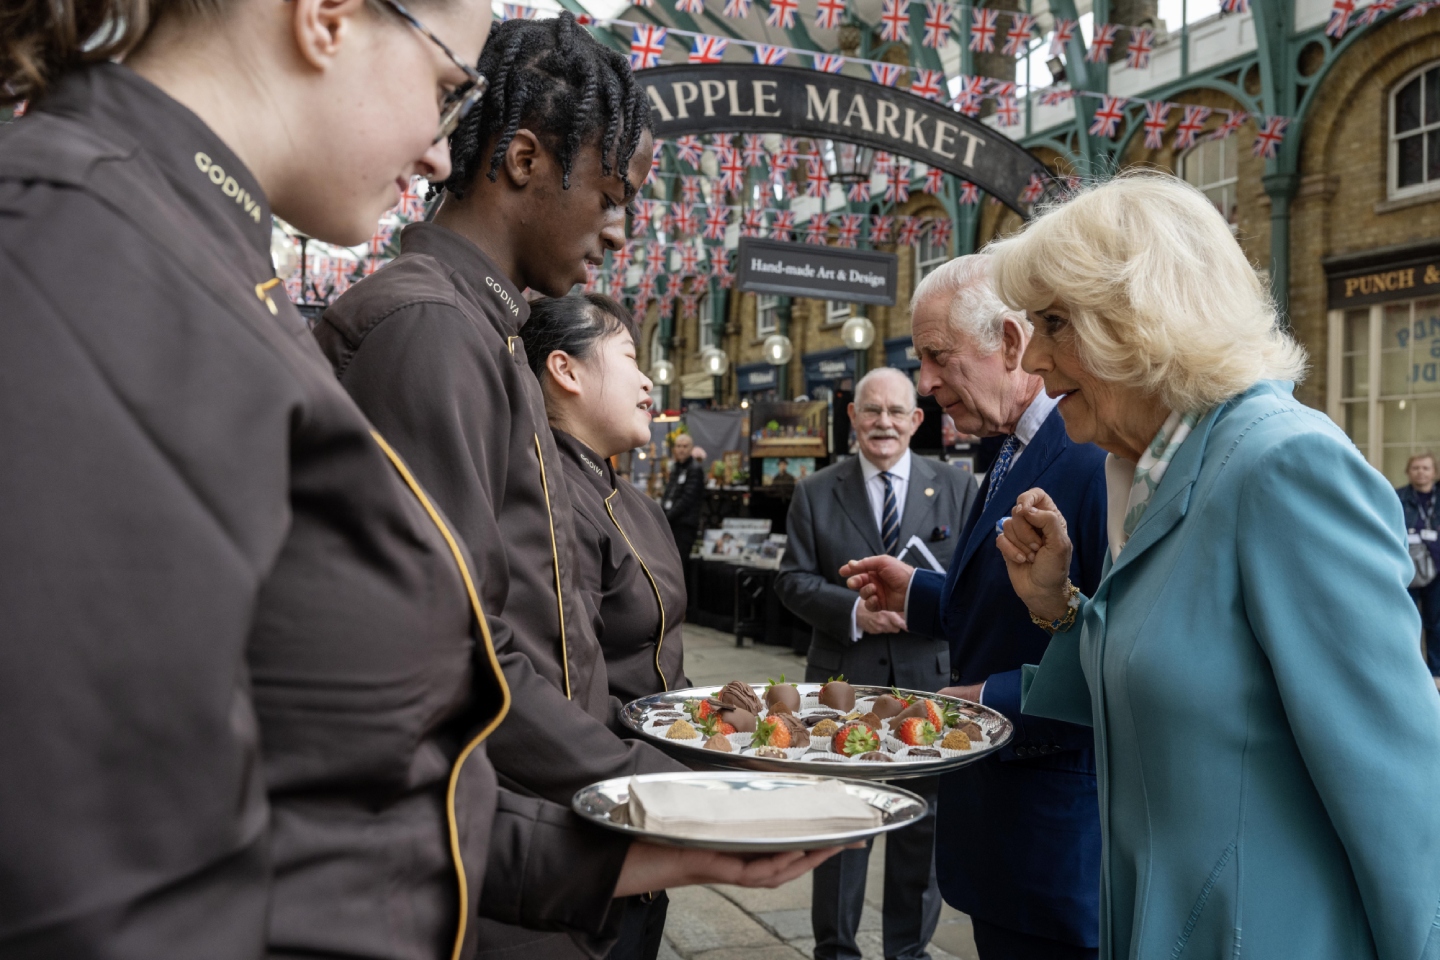 GODIVA Treats for British King Charles III and Queen Camilla